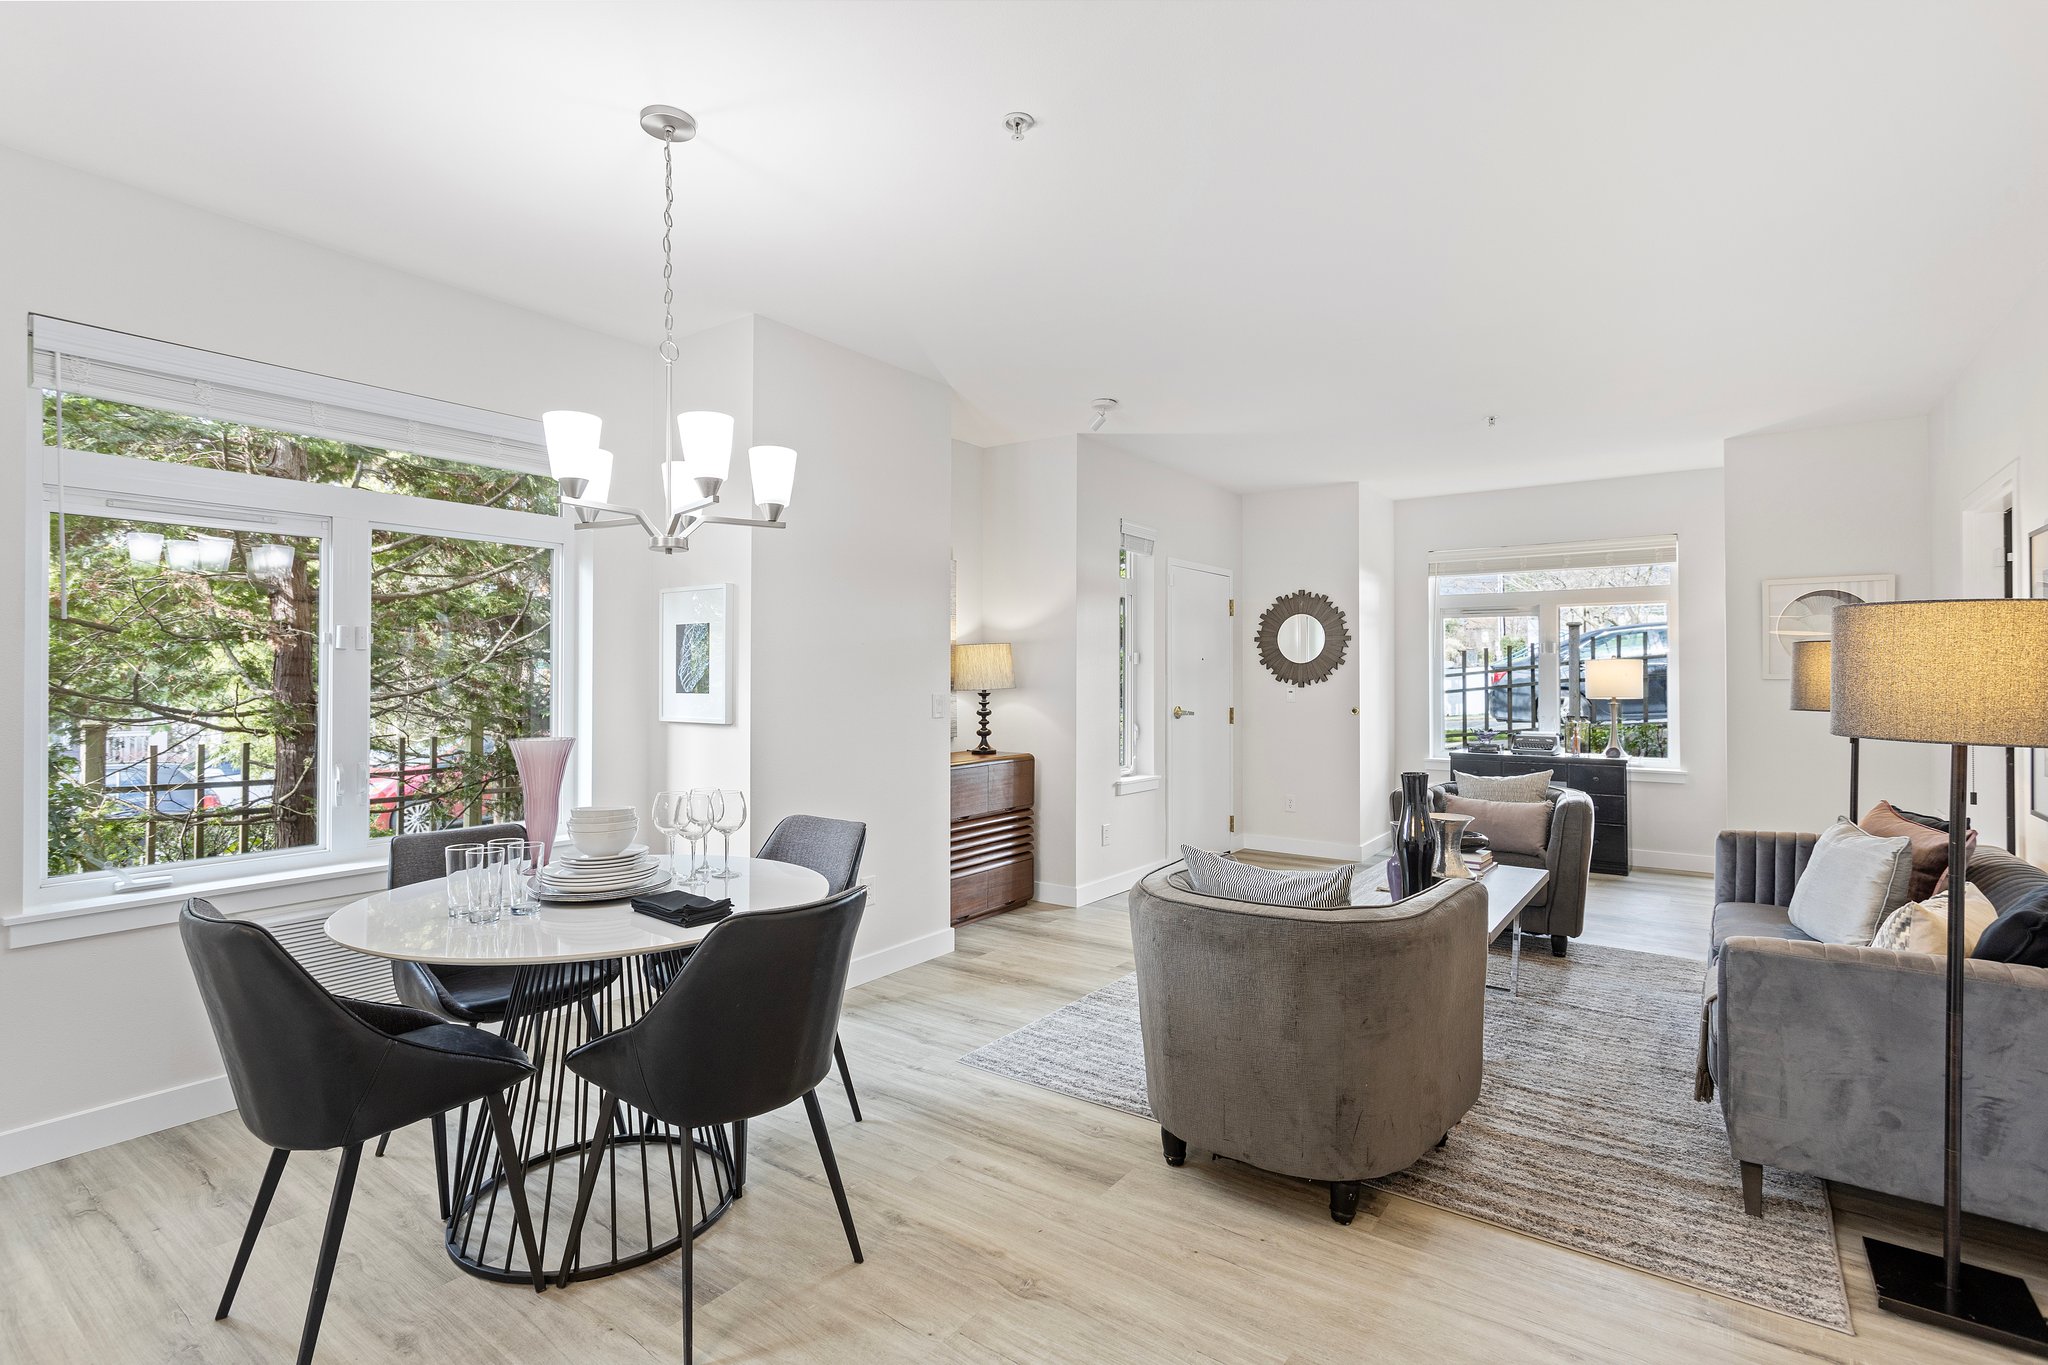 Delight in the expansive living room that gracefully flows into the dining area, where west-facing windows invite an abundance of evening light, setting the stage for memorable moments and cozy twilight gatherings.